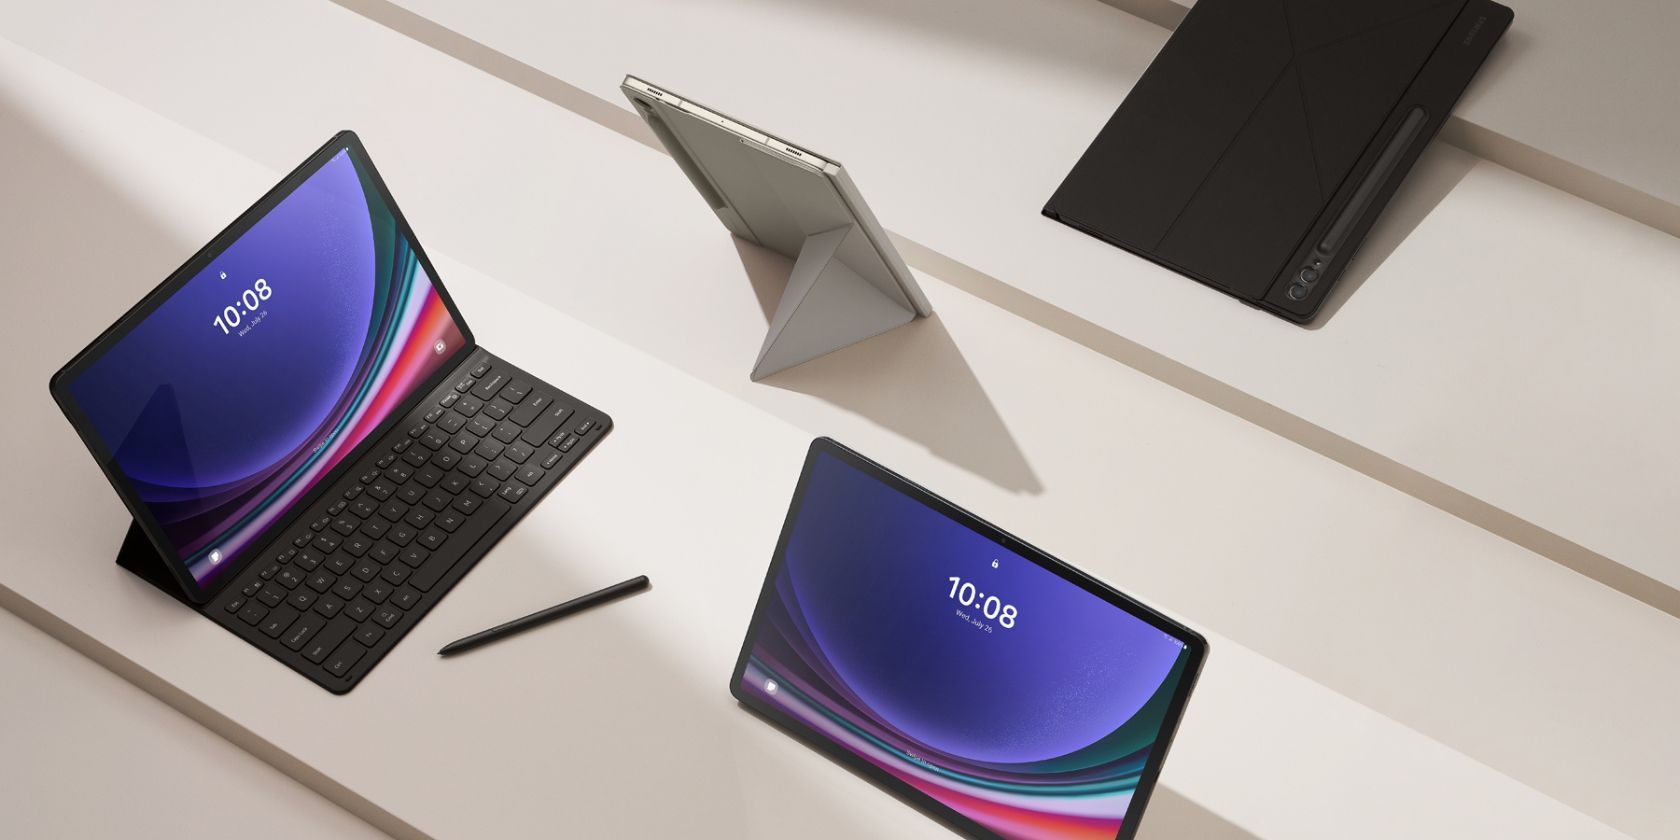 Samsung Galaxy Tab S9 vs. Pixel Tablet: Price, Feature Comparison - Video -  CNET